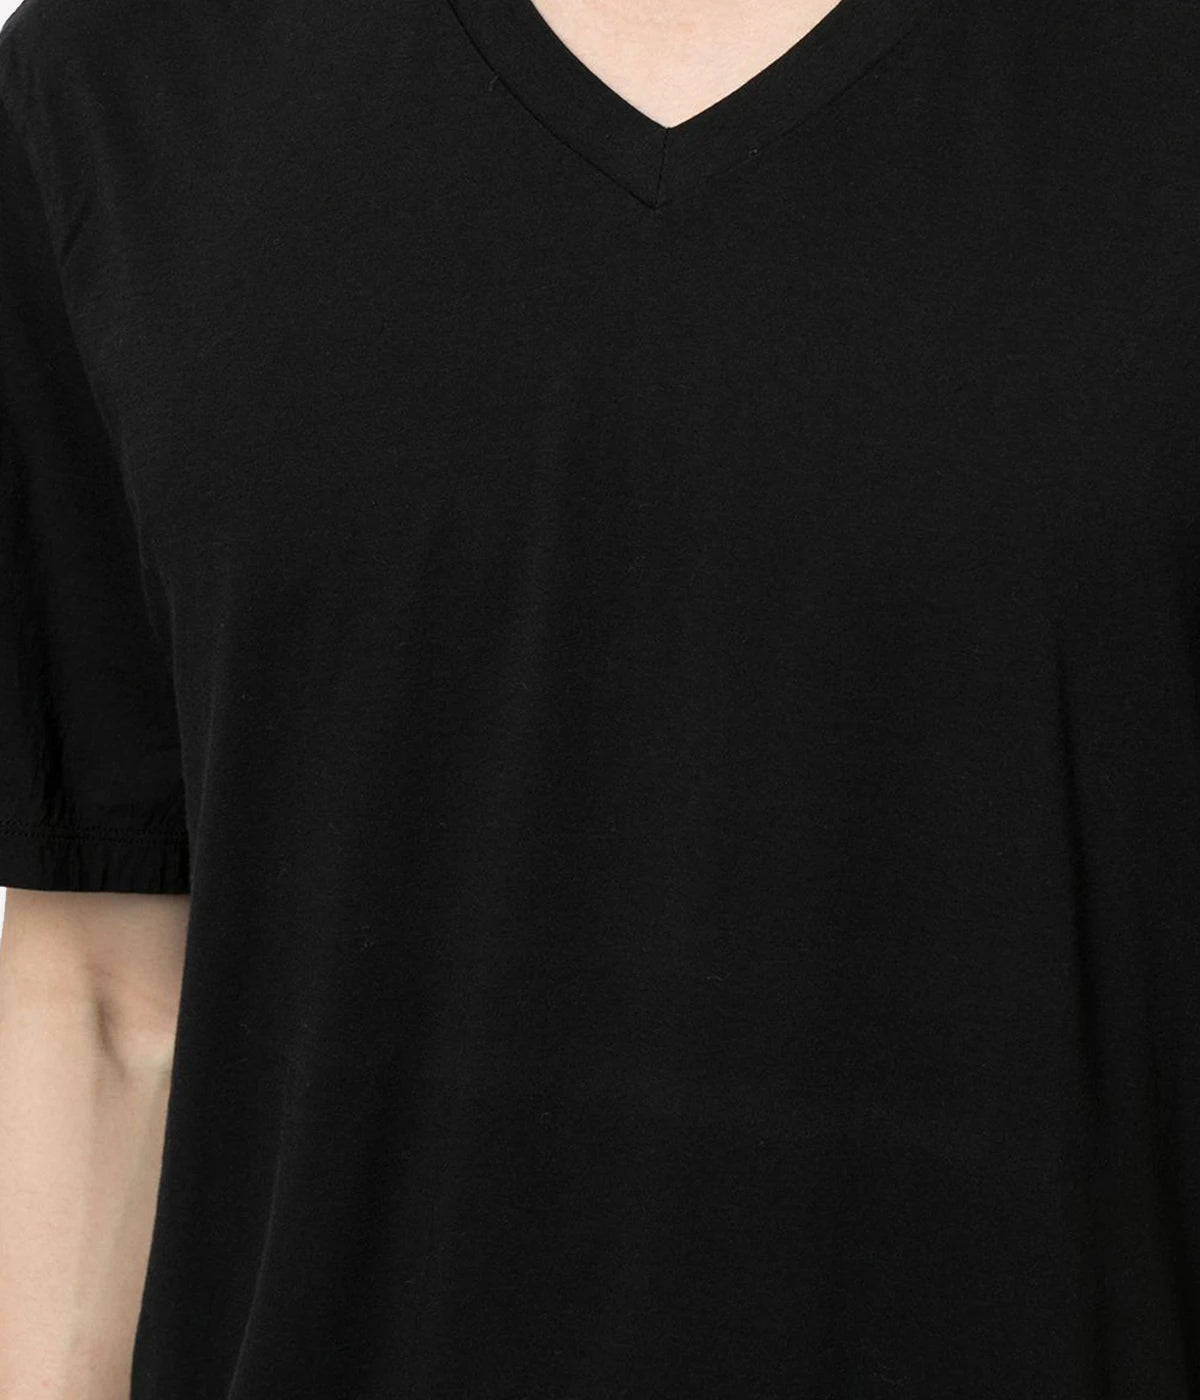 A close up shot of the inset v neck trim, short sleeves  and clean finished hem. James purse black men’s t-shirt. The t-shirt you’ll want to wear everyday. 